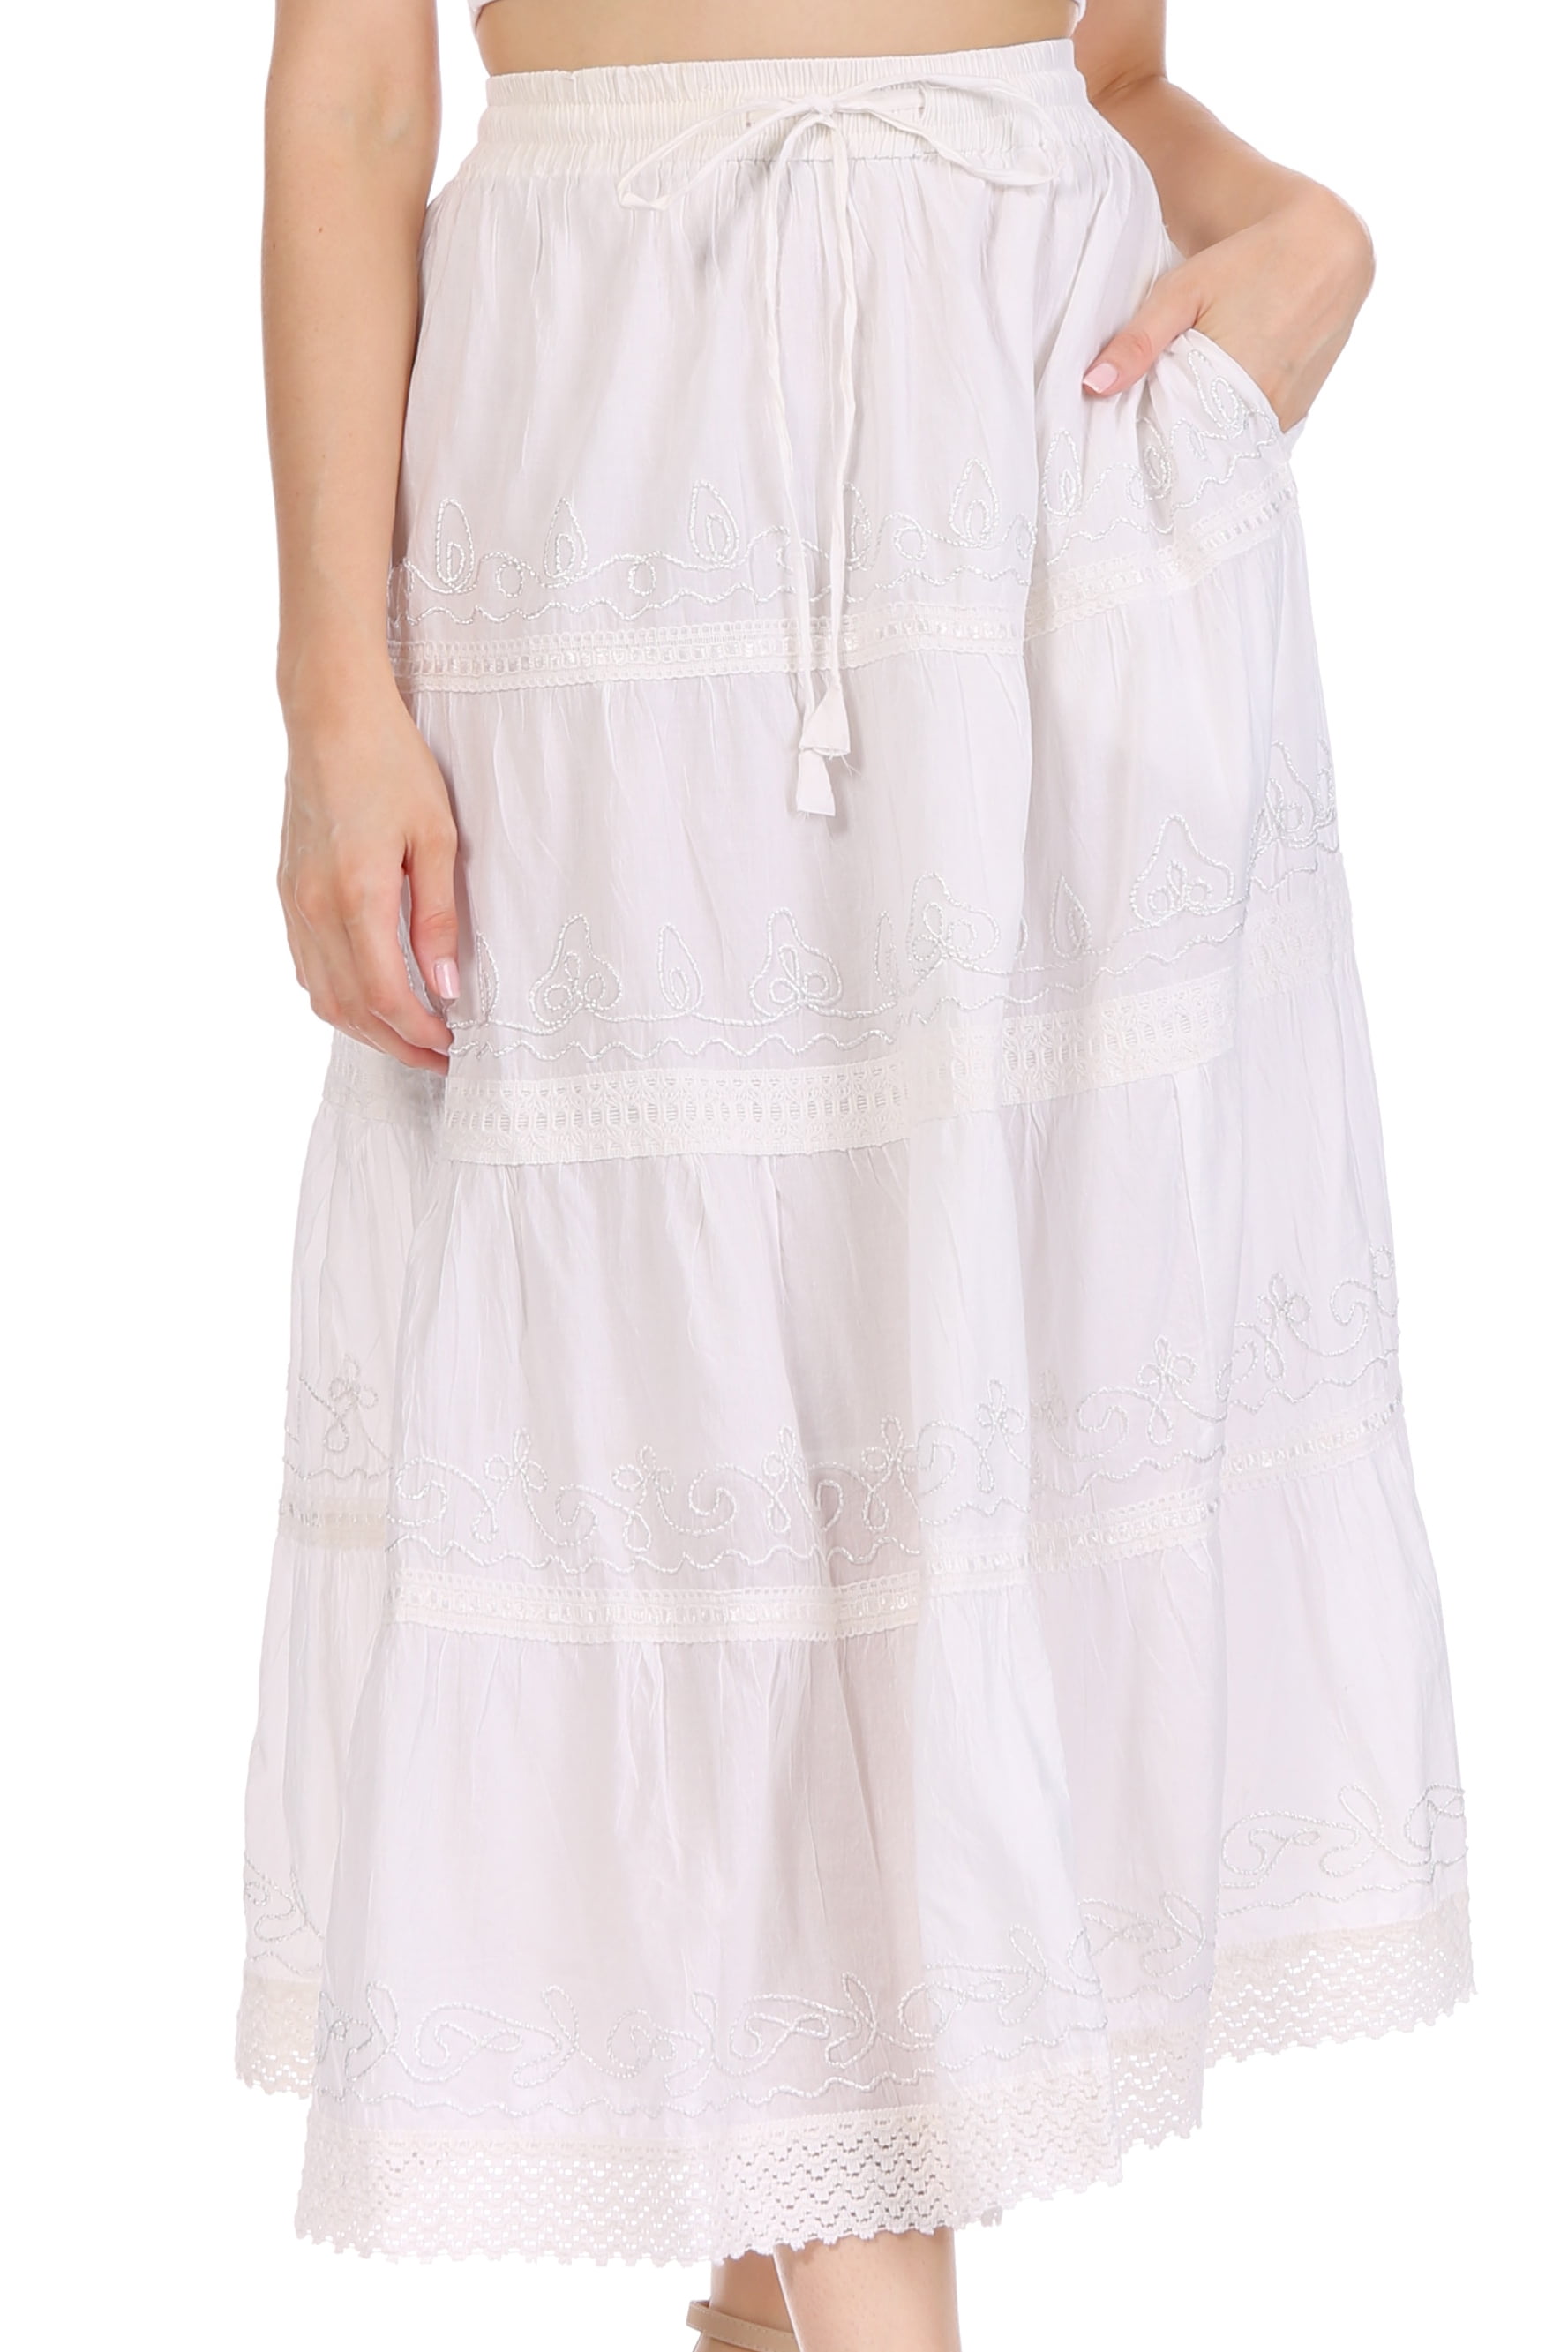 Sakkas Solid Embroidered Crochet Lace Trim Gypsy Bohemian Mid Length Cotton  Skirt - White - One Size - Walmart.com